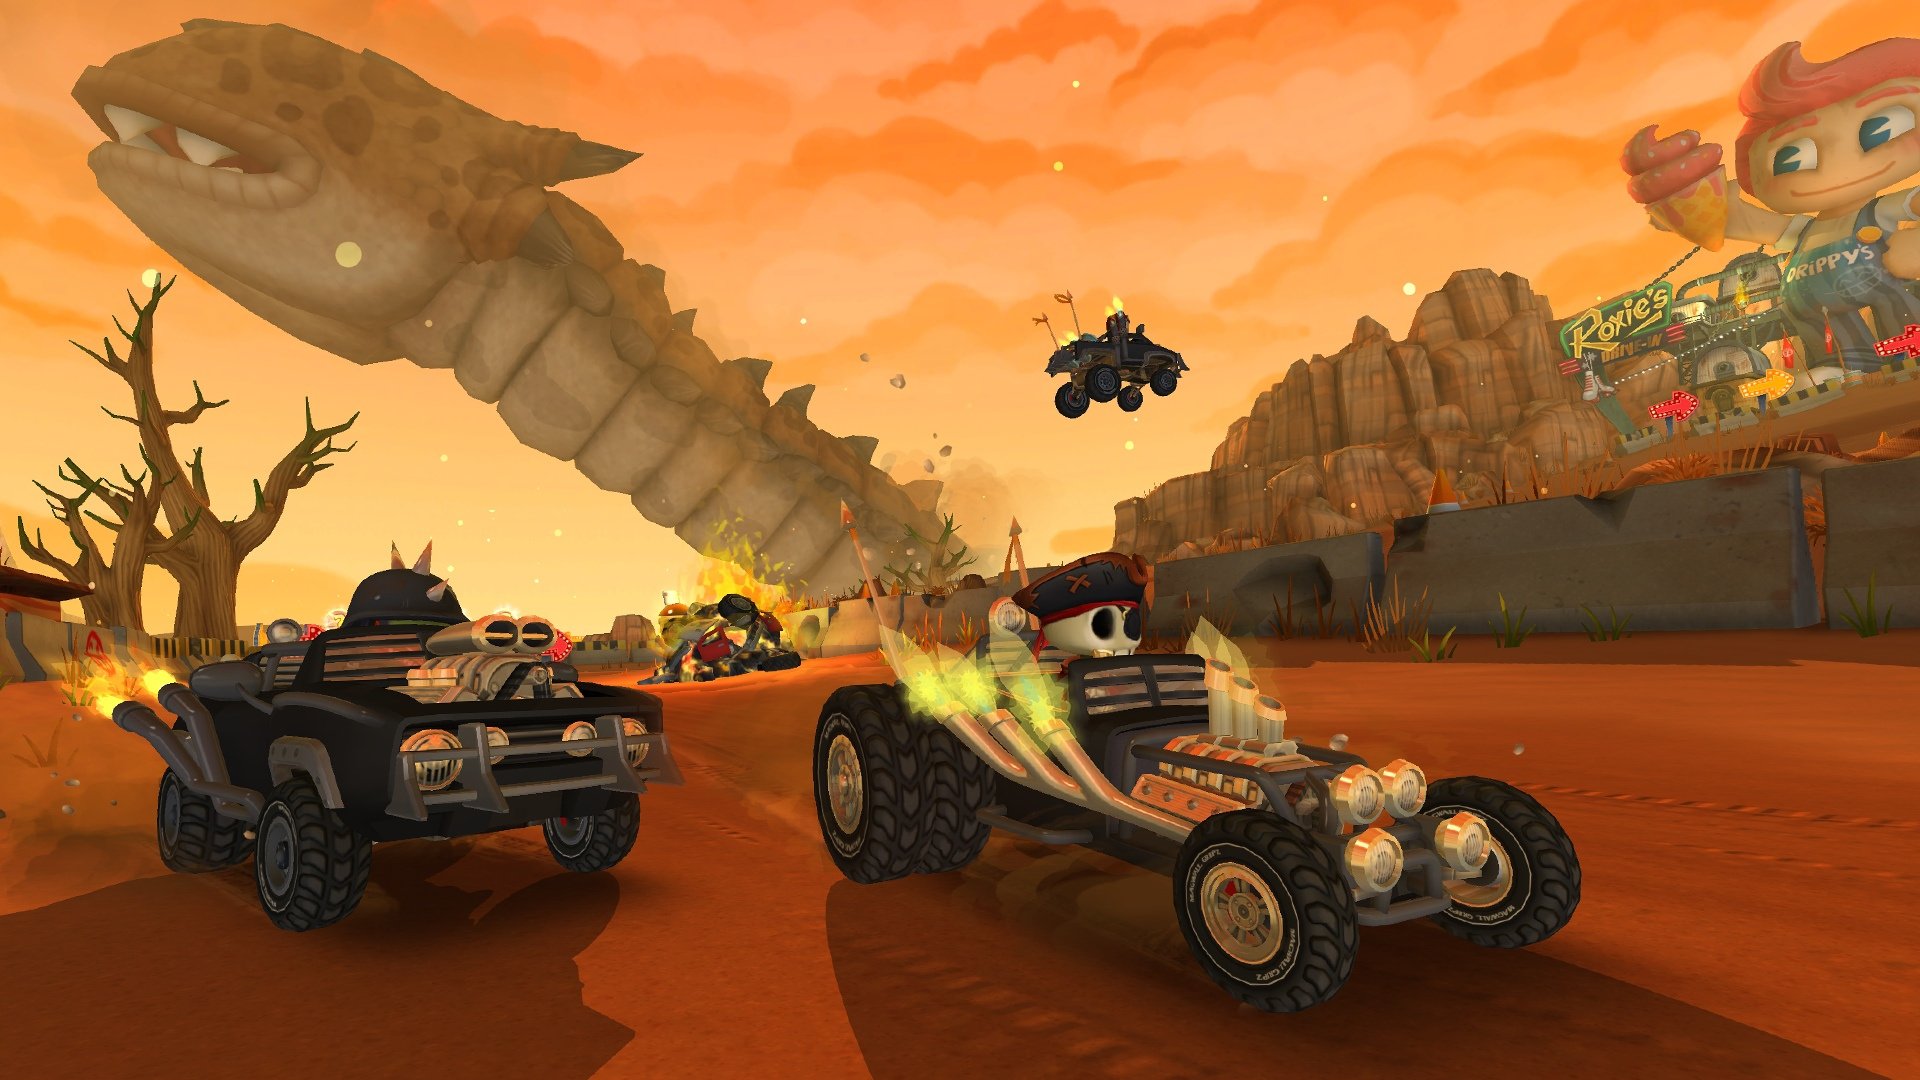 beach buggy racing download for free